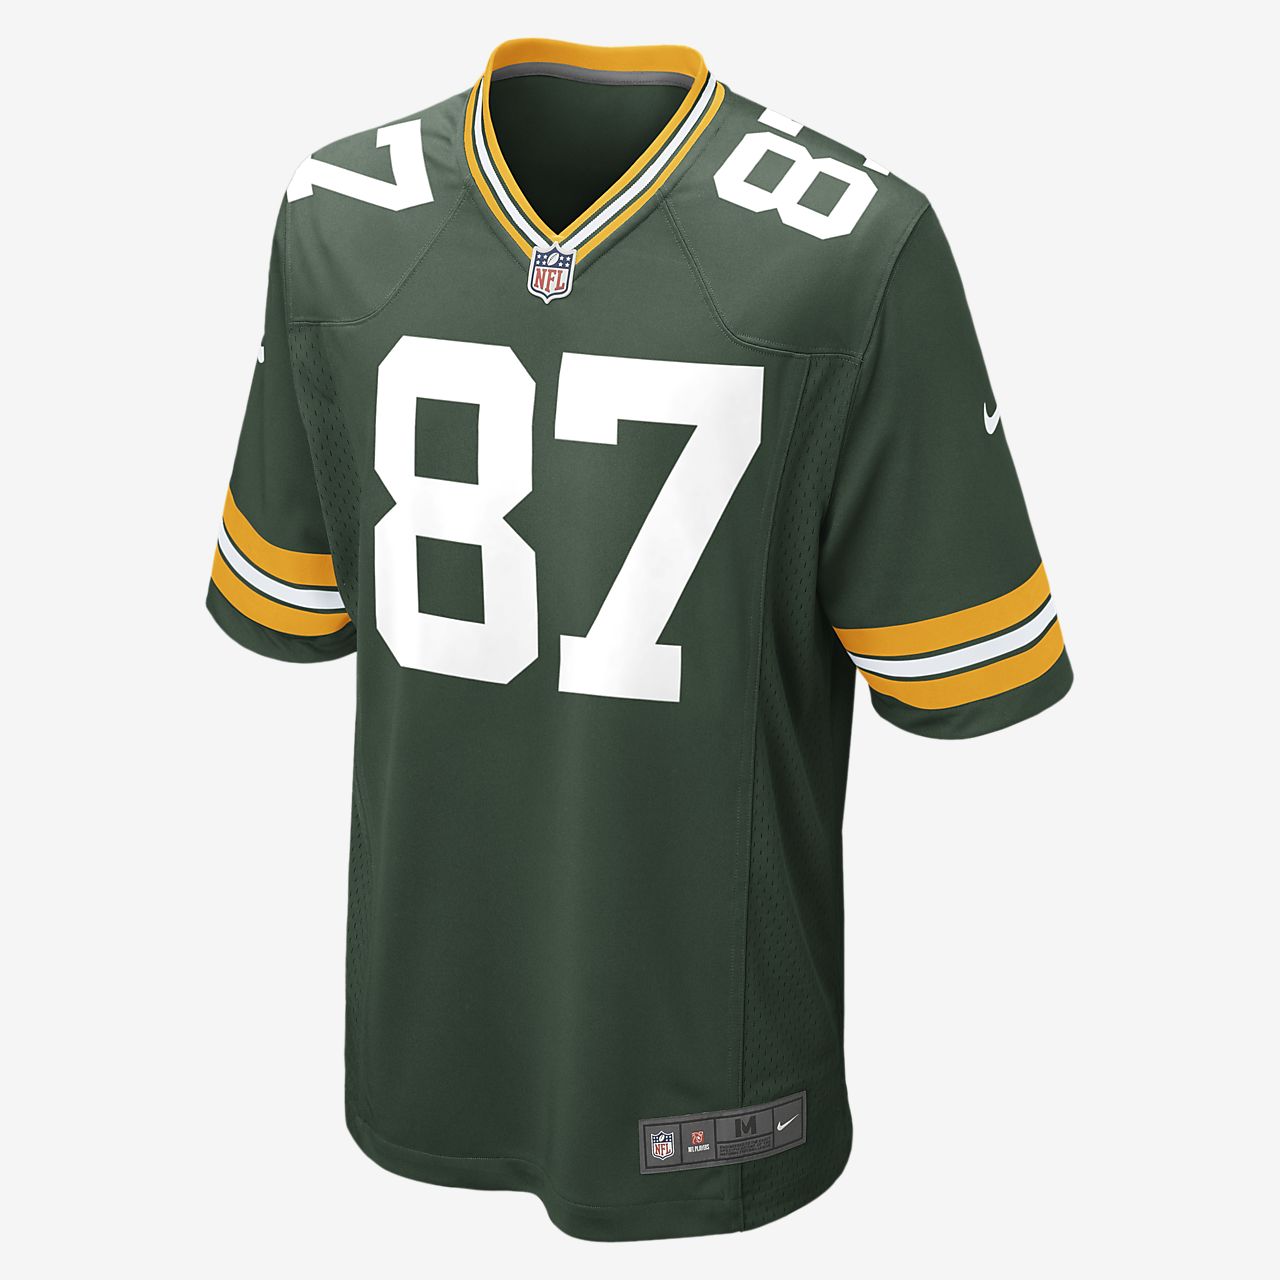 nelson green bay packers jersey